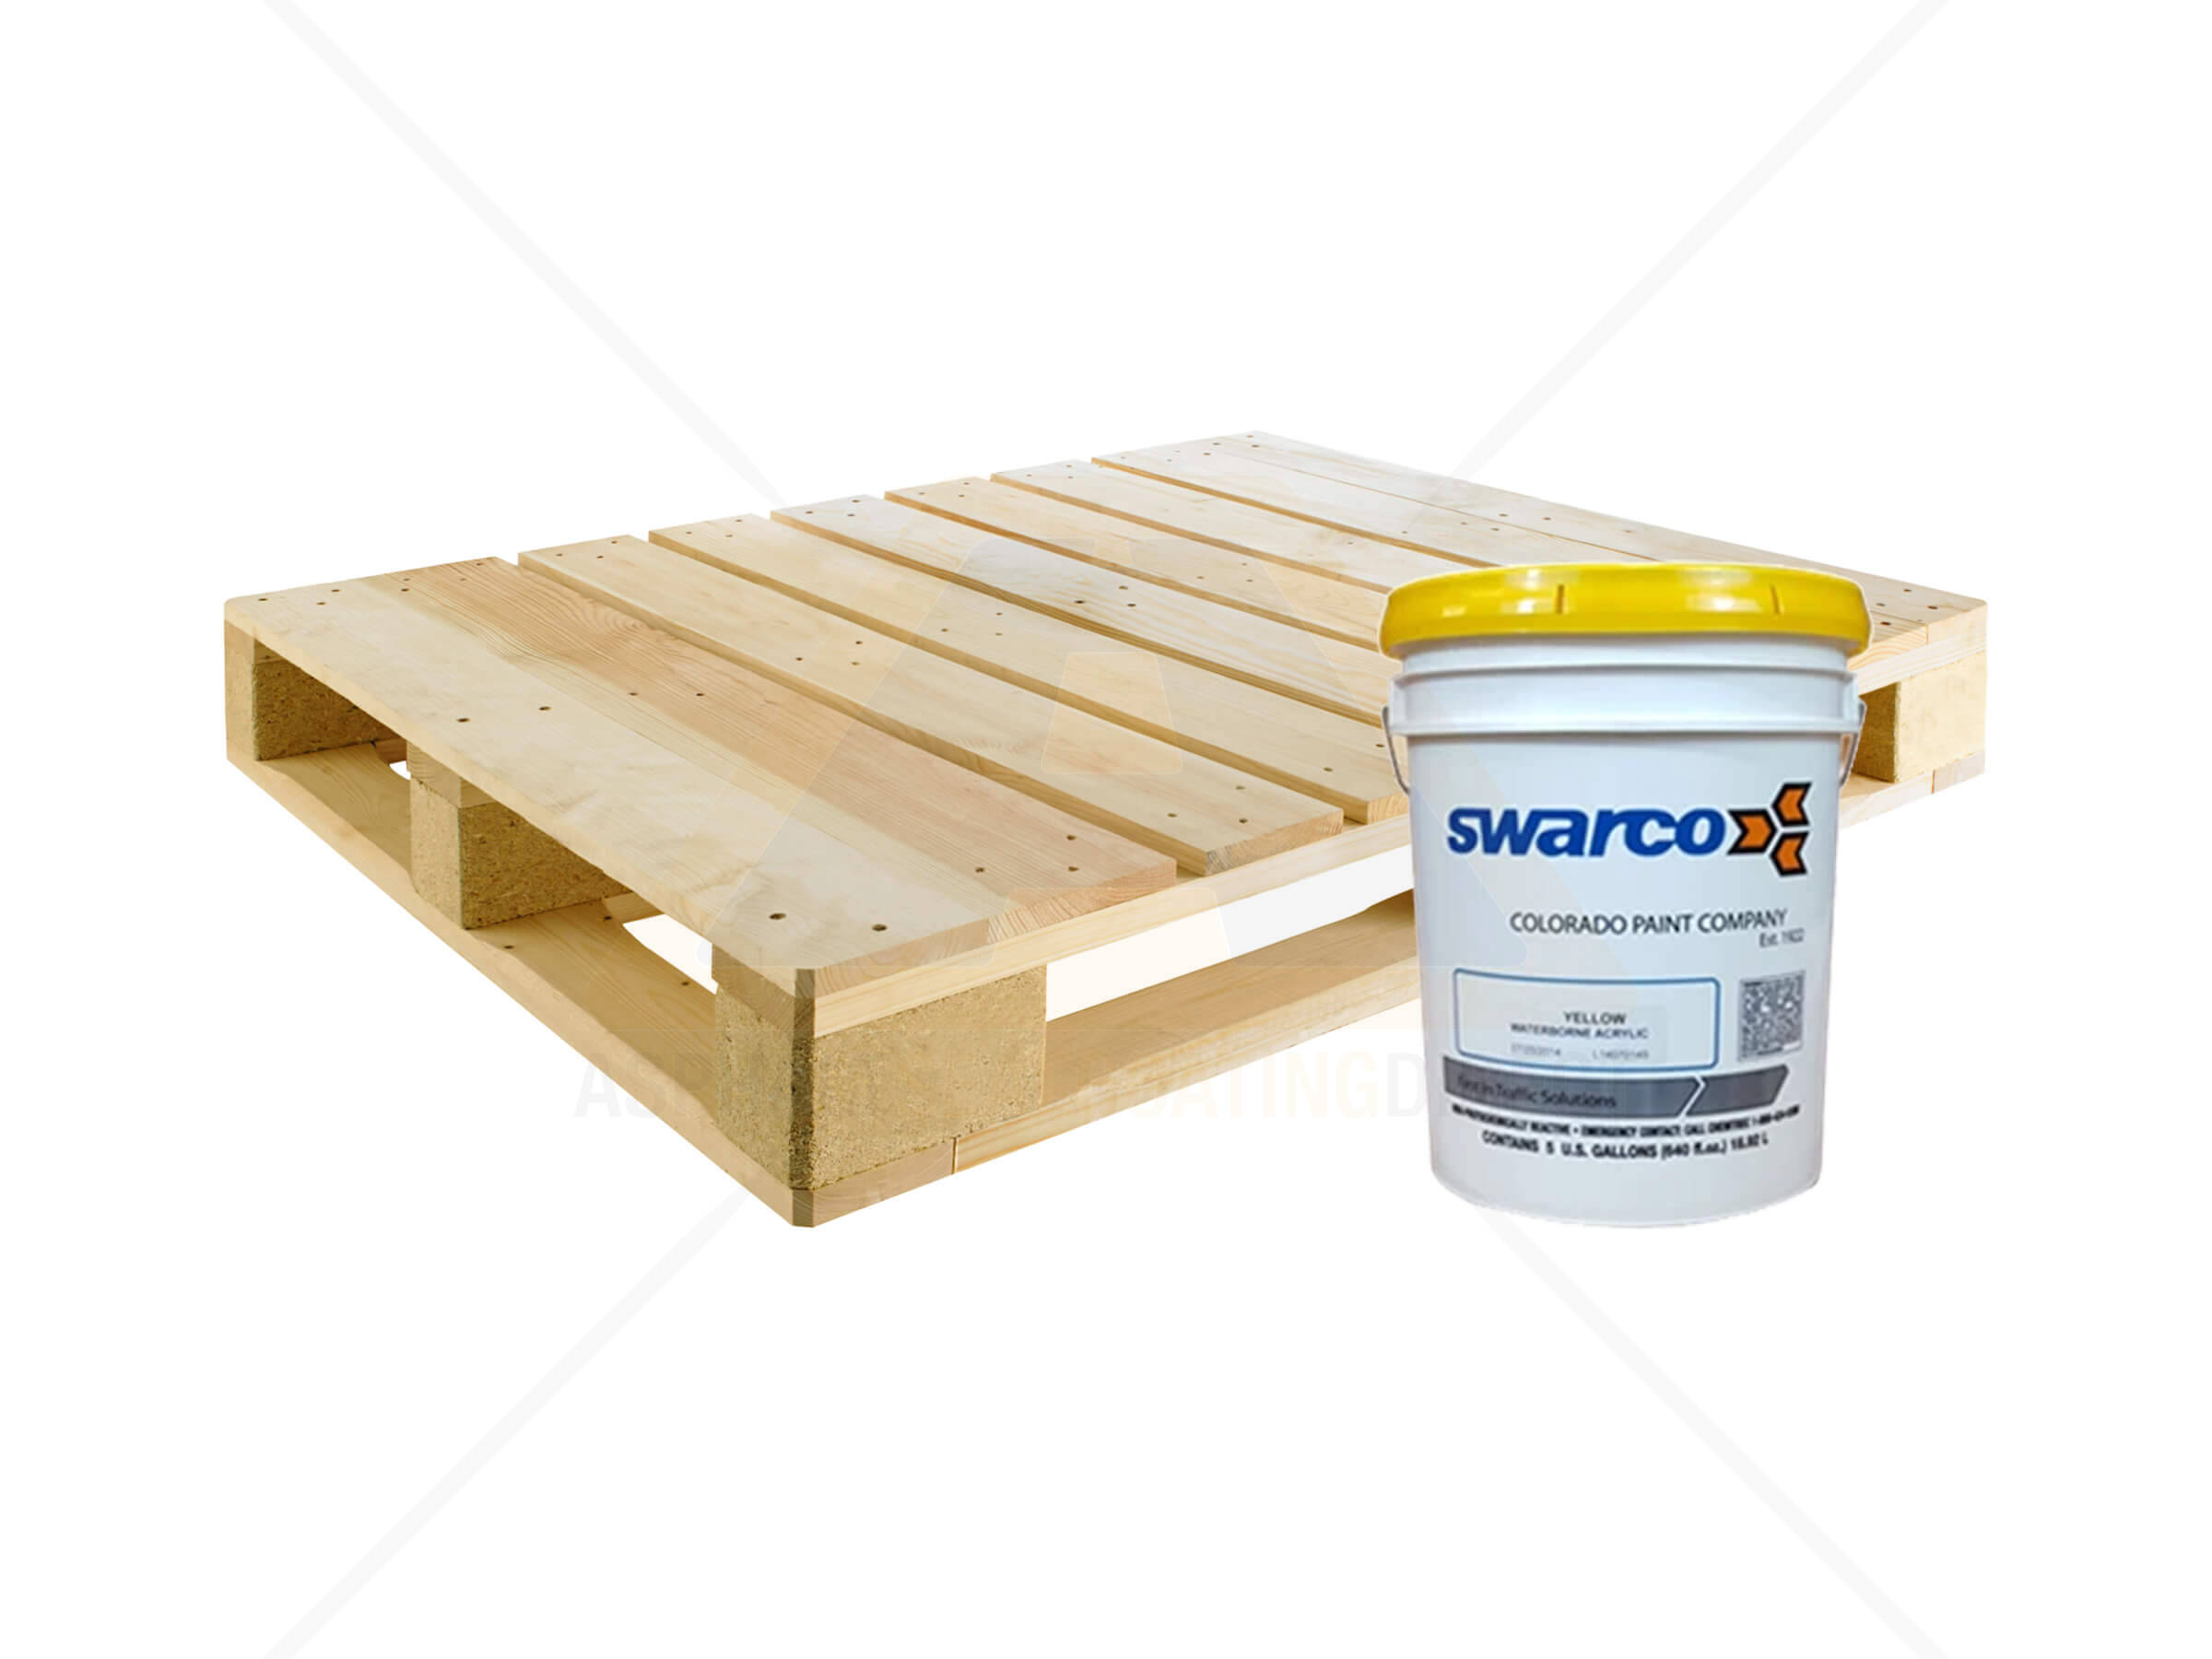 How much does a 5 gallon bucket of paint weigh Swarco 1140 Series Paint 5 Gallon Pallet Federal Spec Tt P 1952f Type 1 For Sale Asphalt Sealcoating Direct